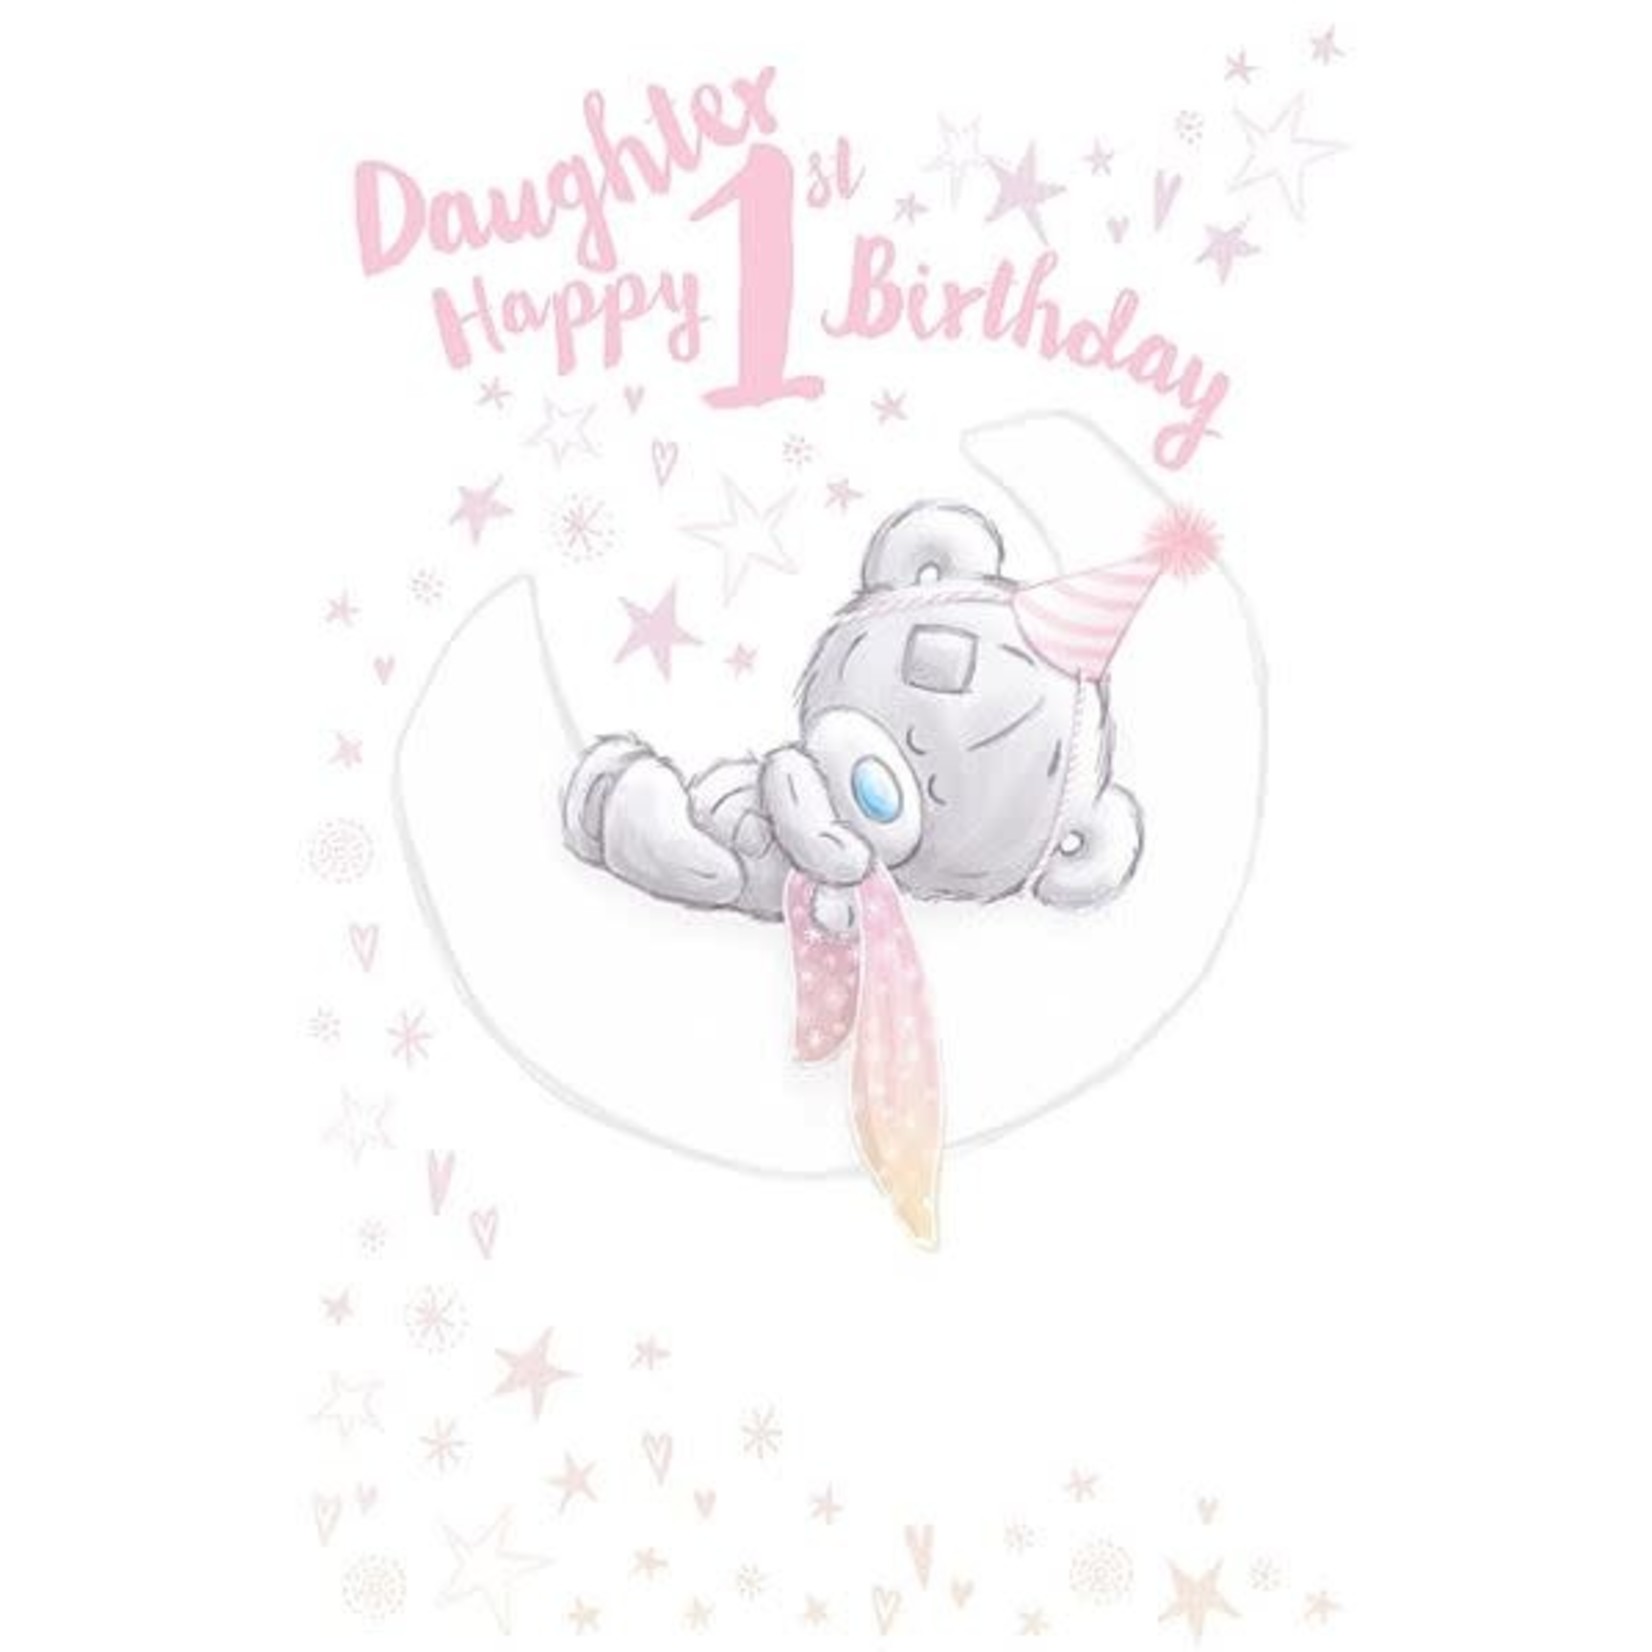 Tatty Ted Happy 1st Birthday Card - Daughter